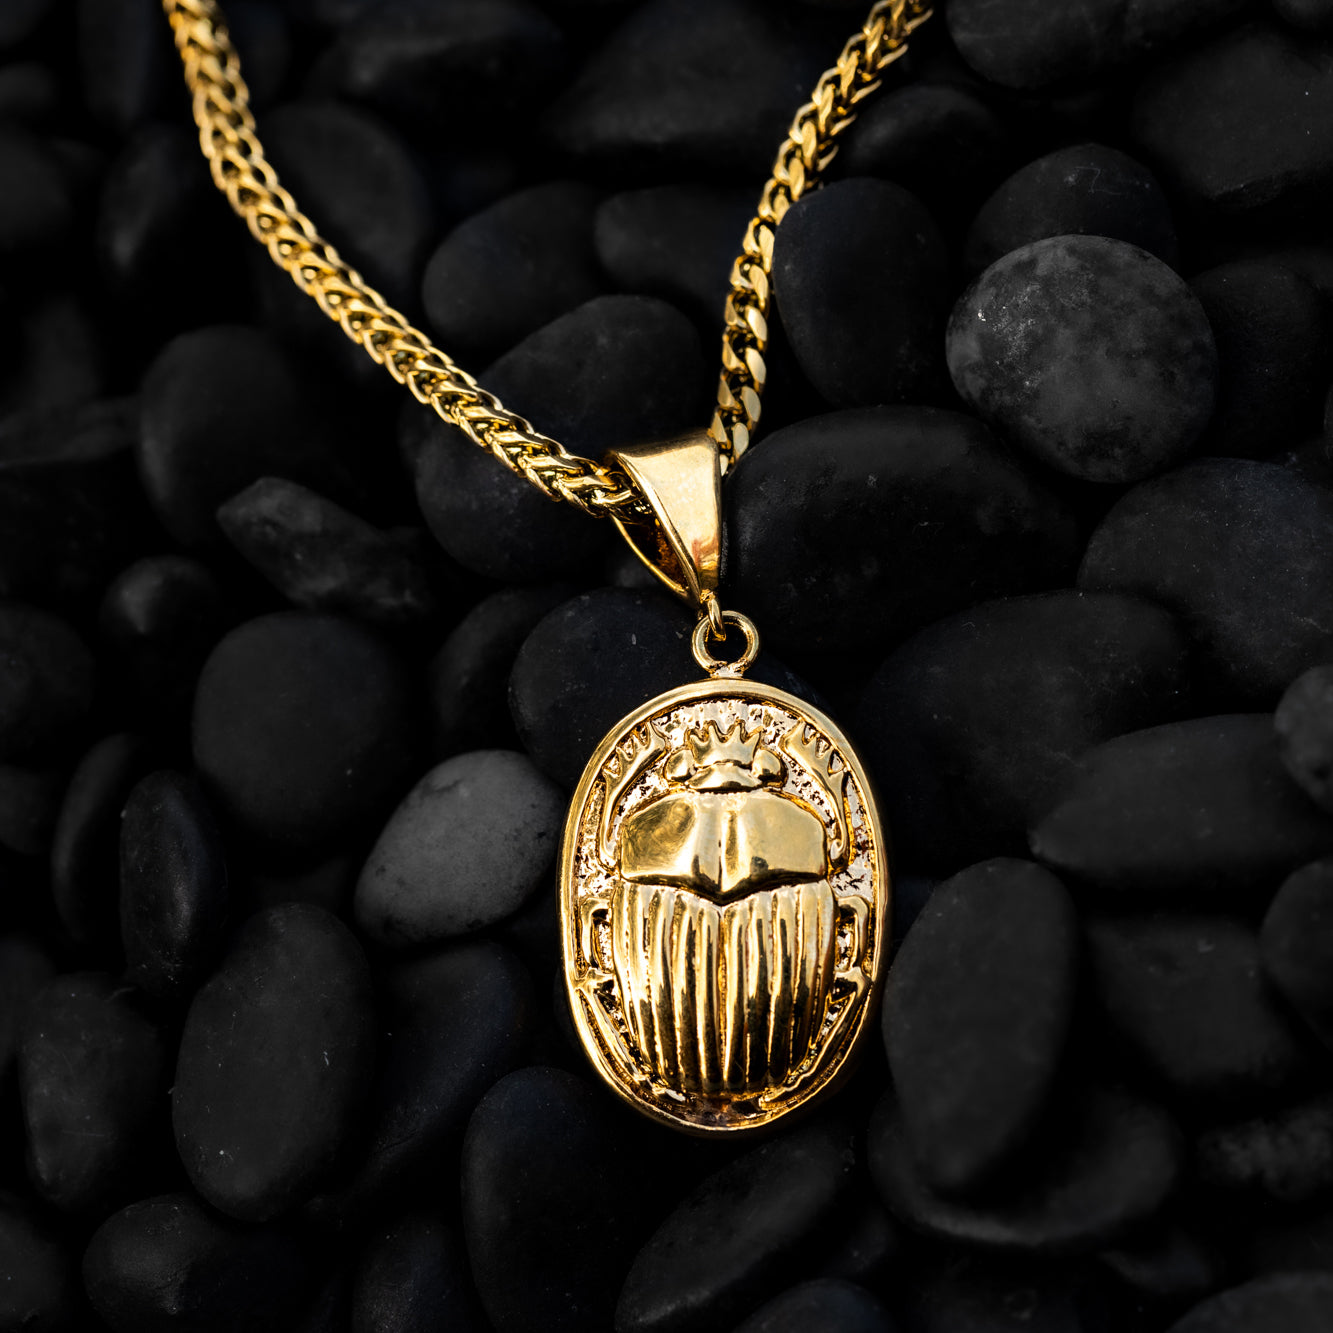 Time can't tarnish the allure of Egypt's ancient gold jewelry